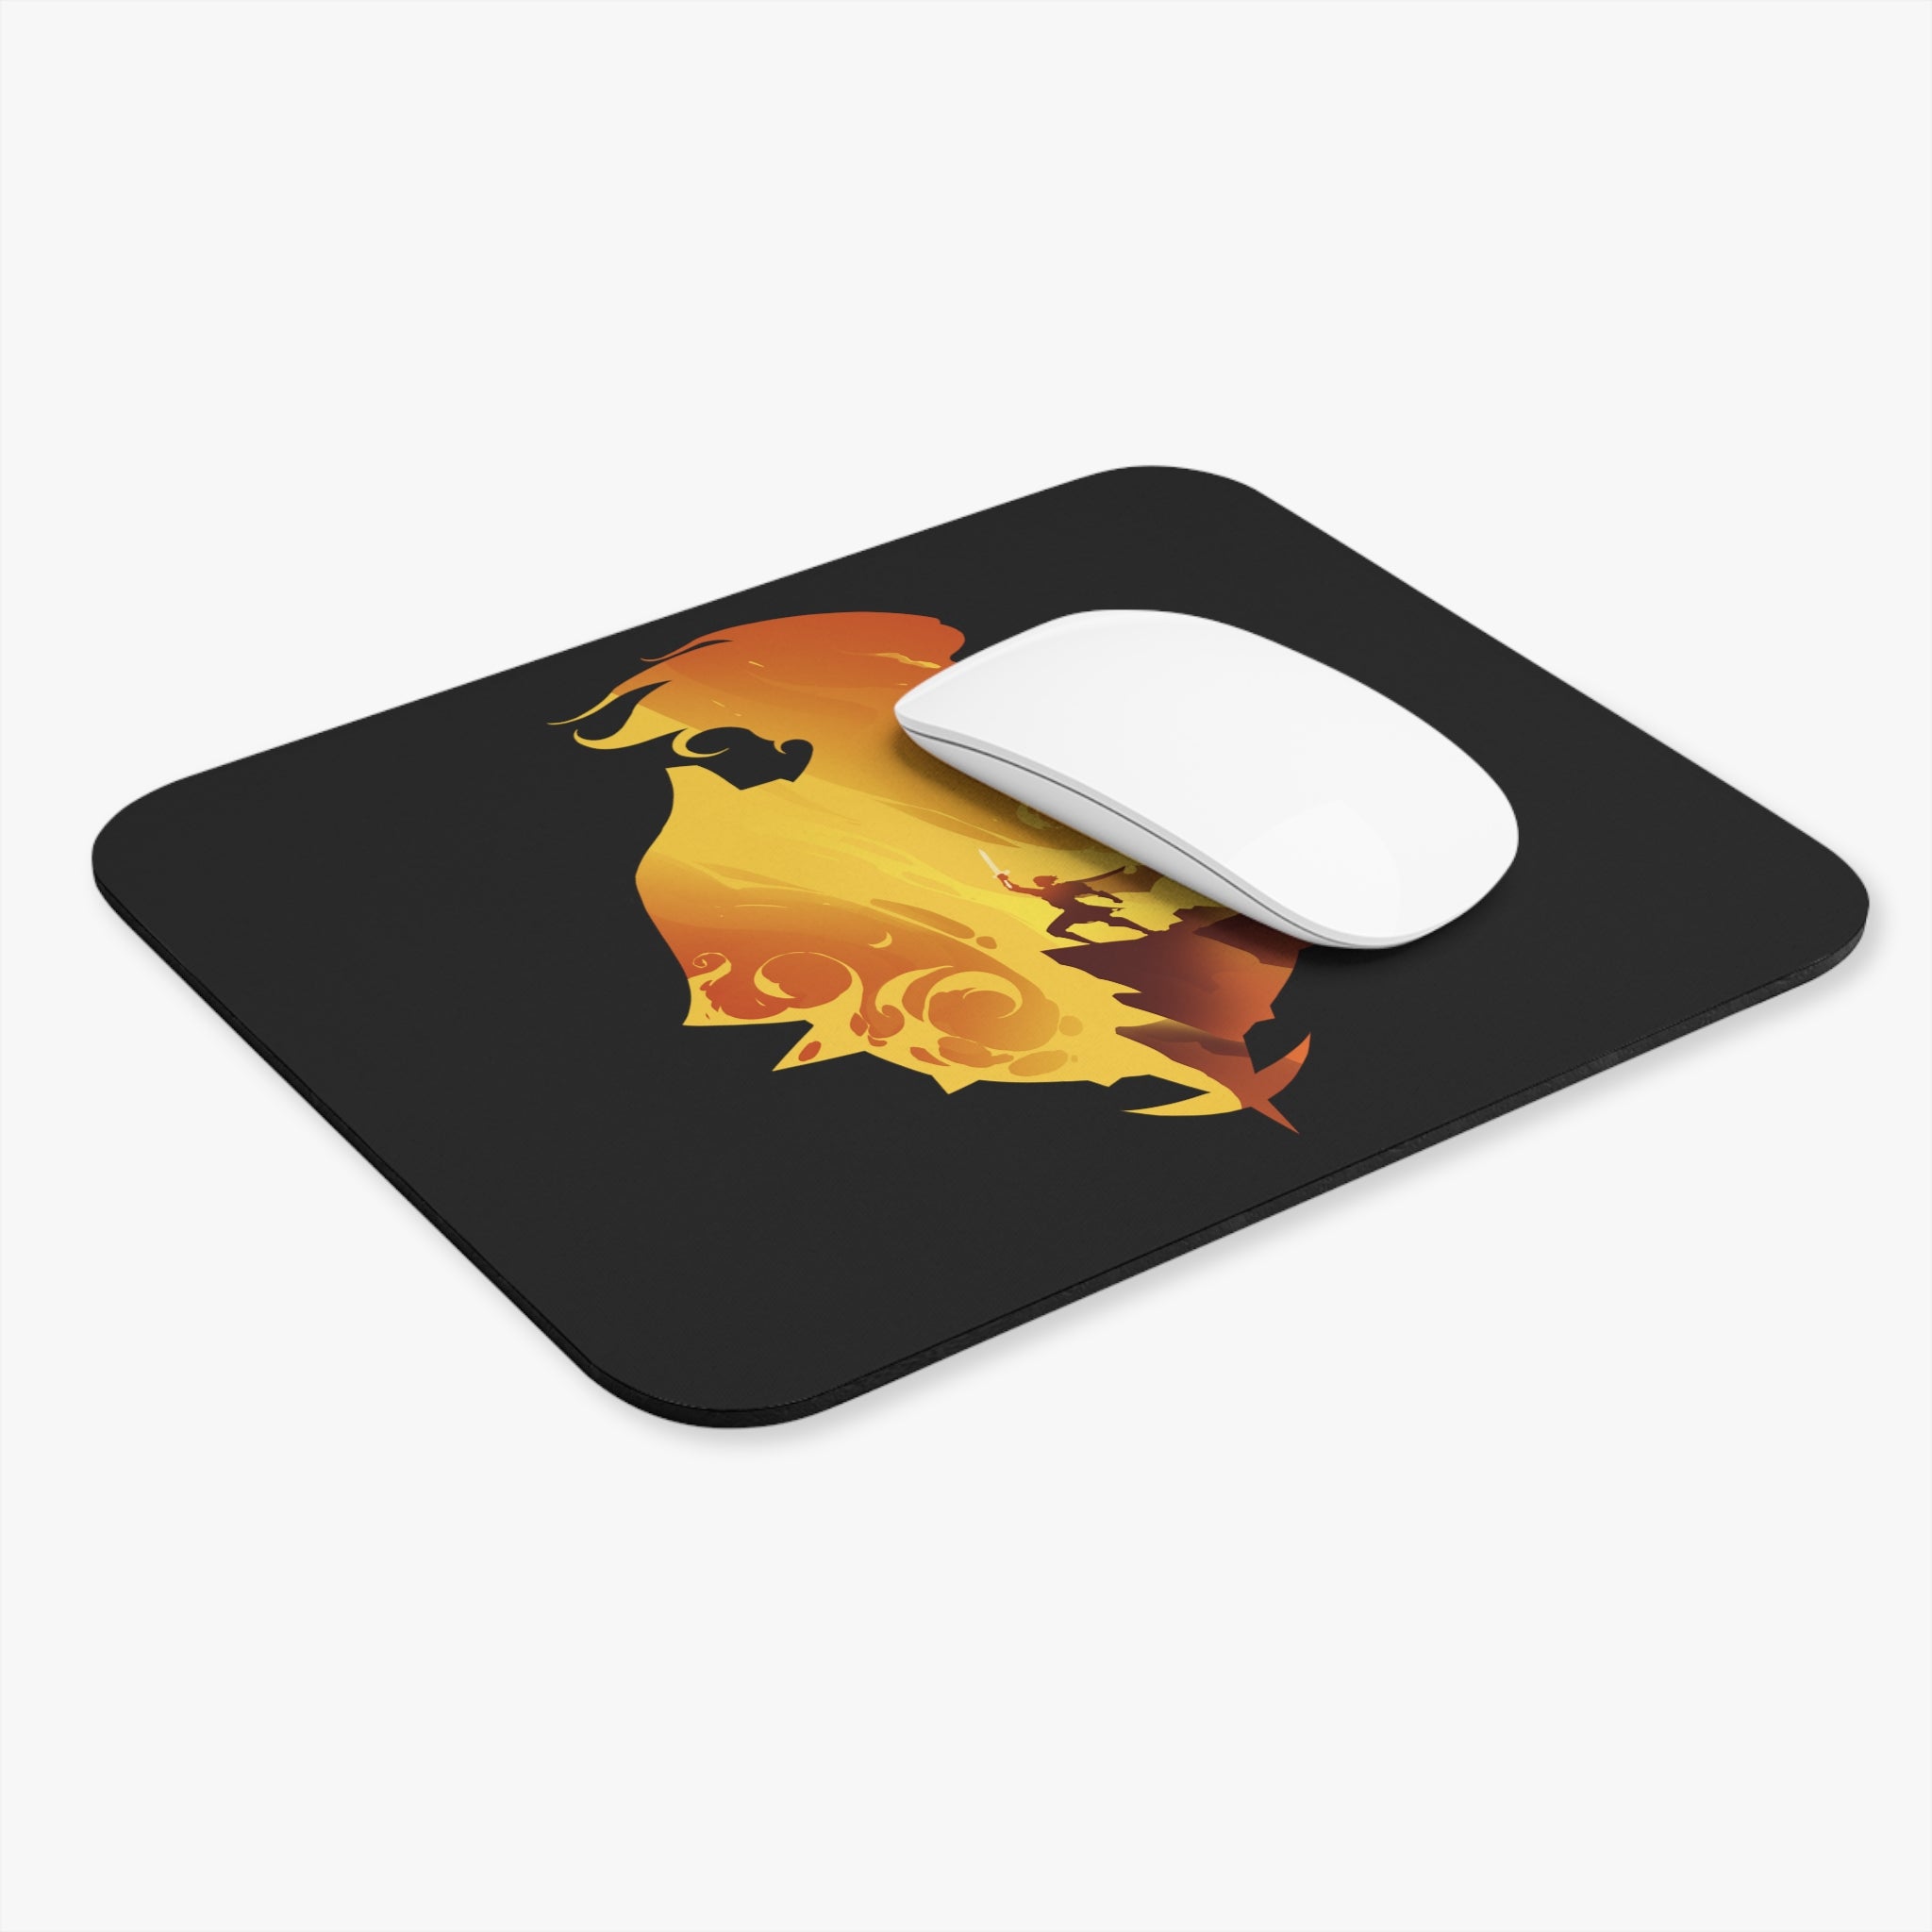 PALADIN CLASS SILHOUETTE RECTANGLER MOUSE PAD